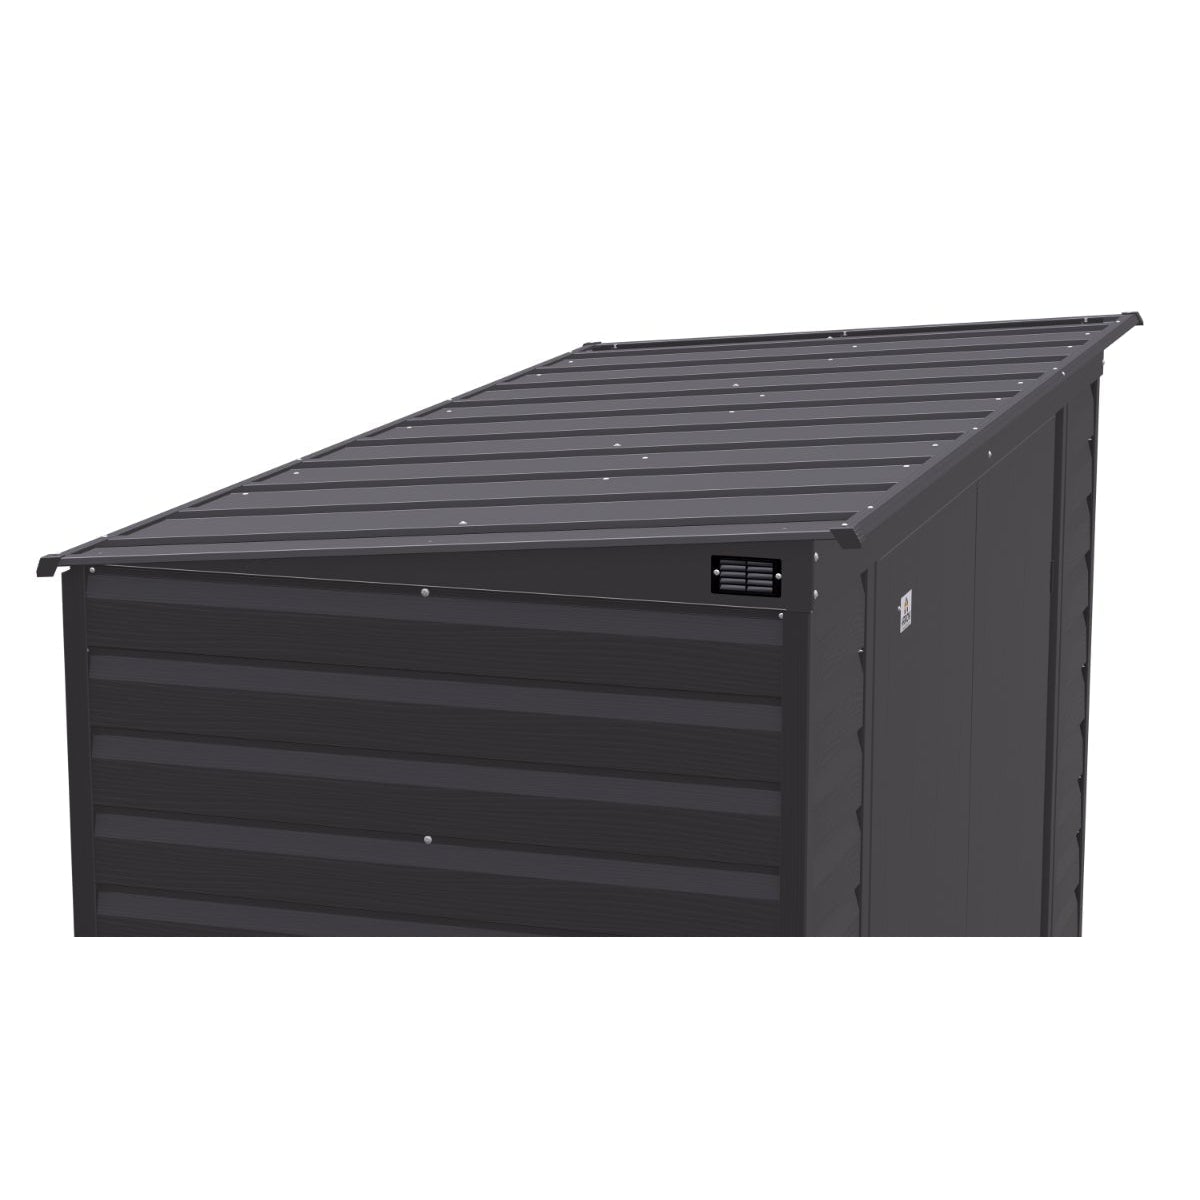 Arrow Select Steel Storage Shed 10 x 4 ft. | Pent Roof - Delightful Yard